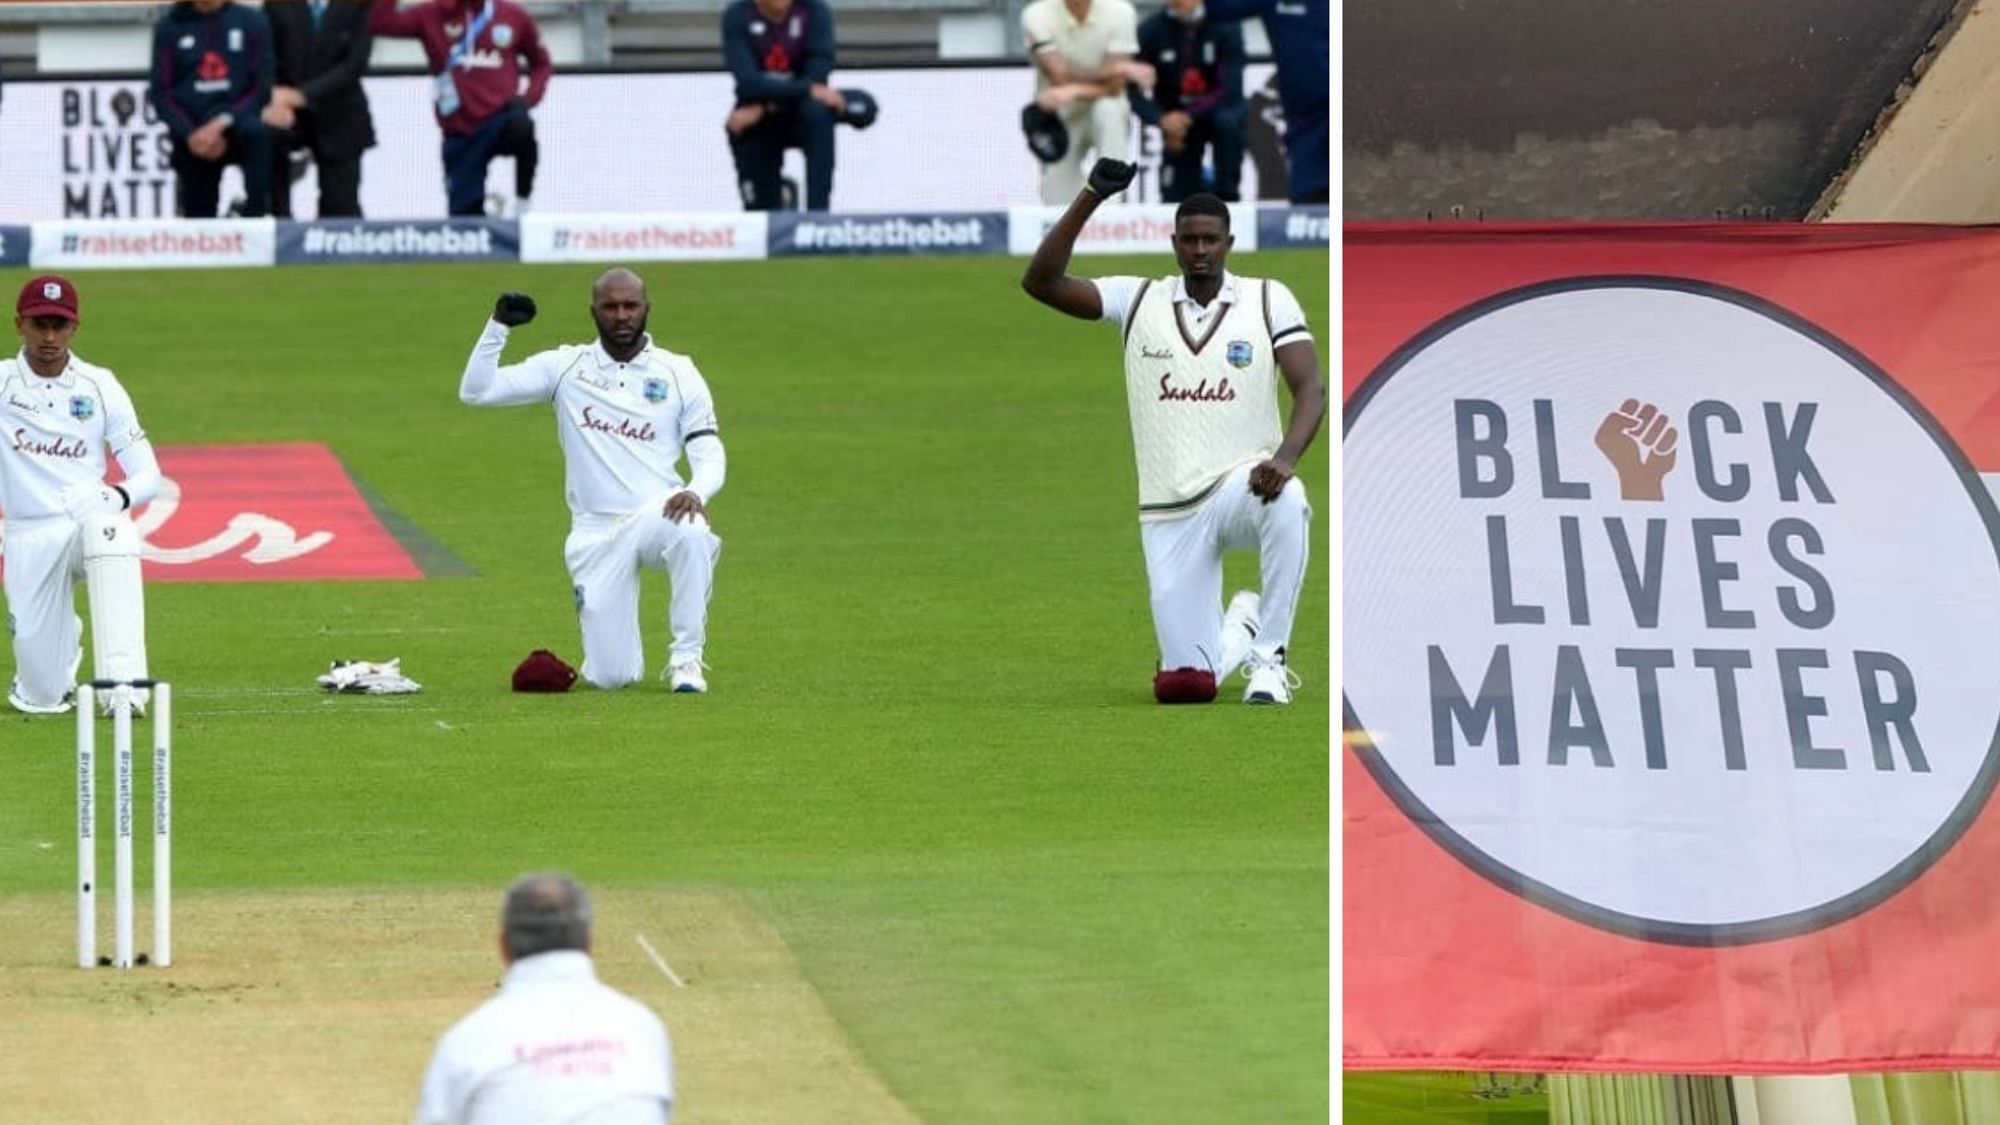 Watch Cricket Returns With Tribute to Black Lives Matter Movement